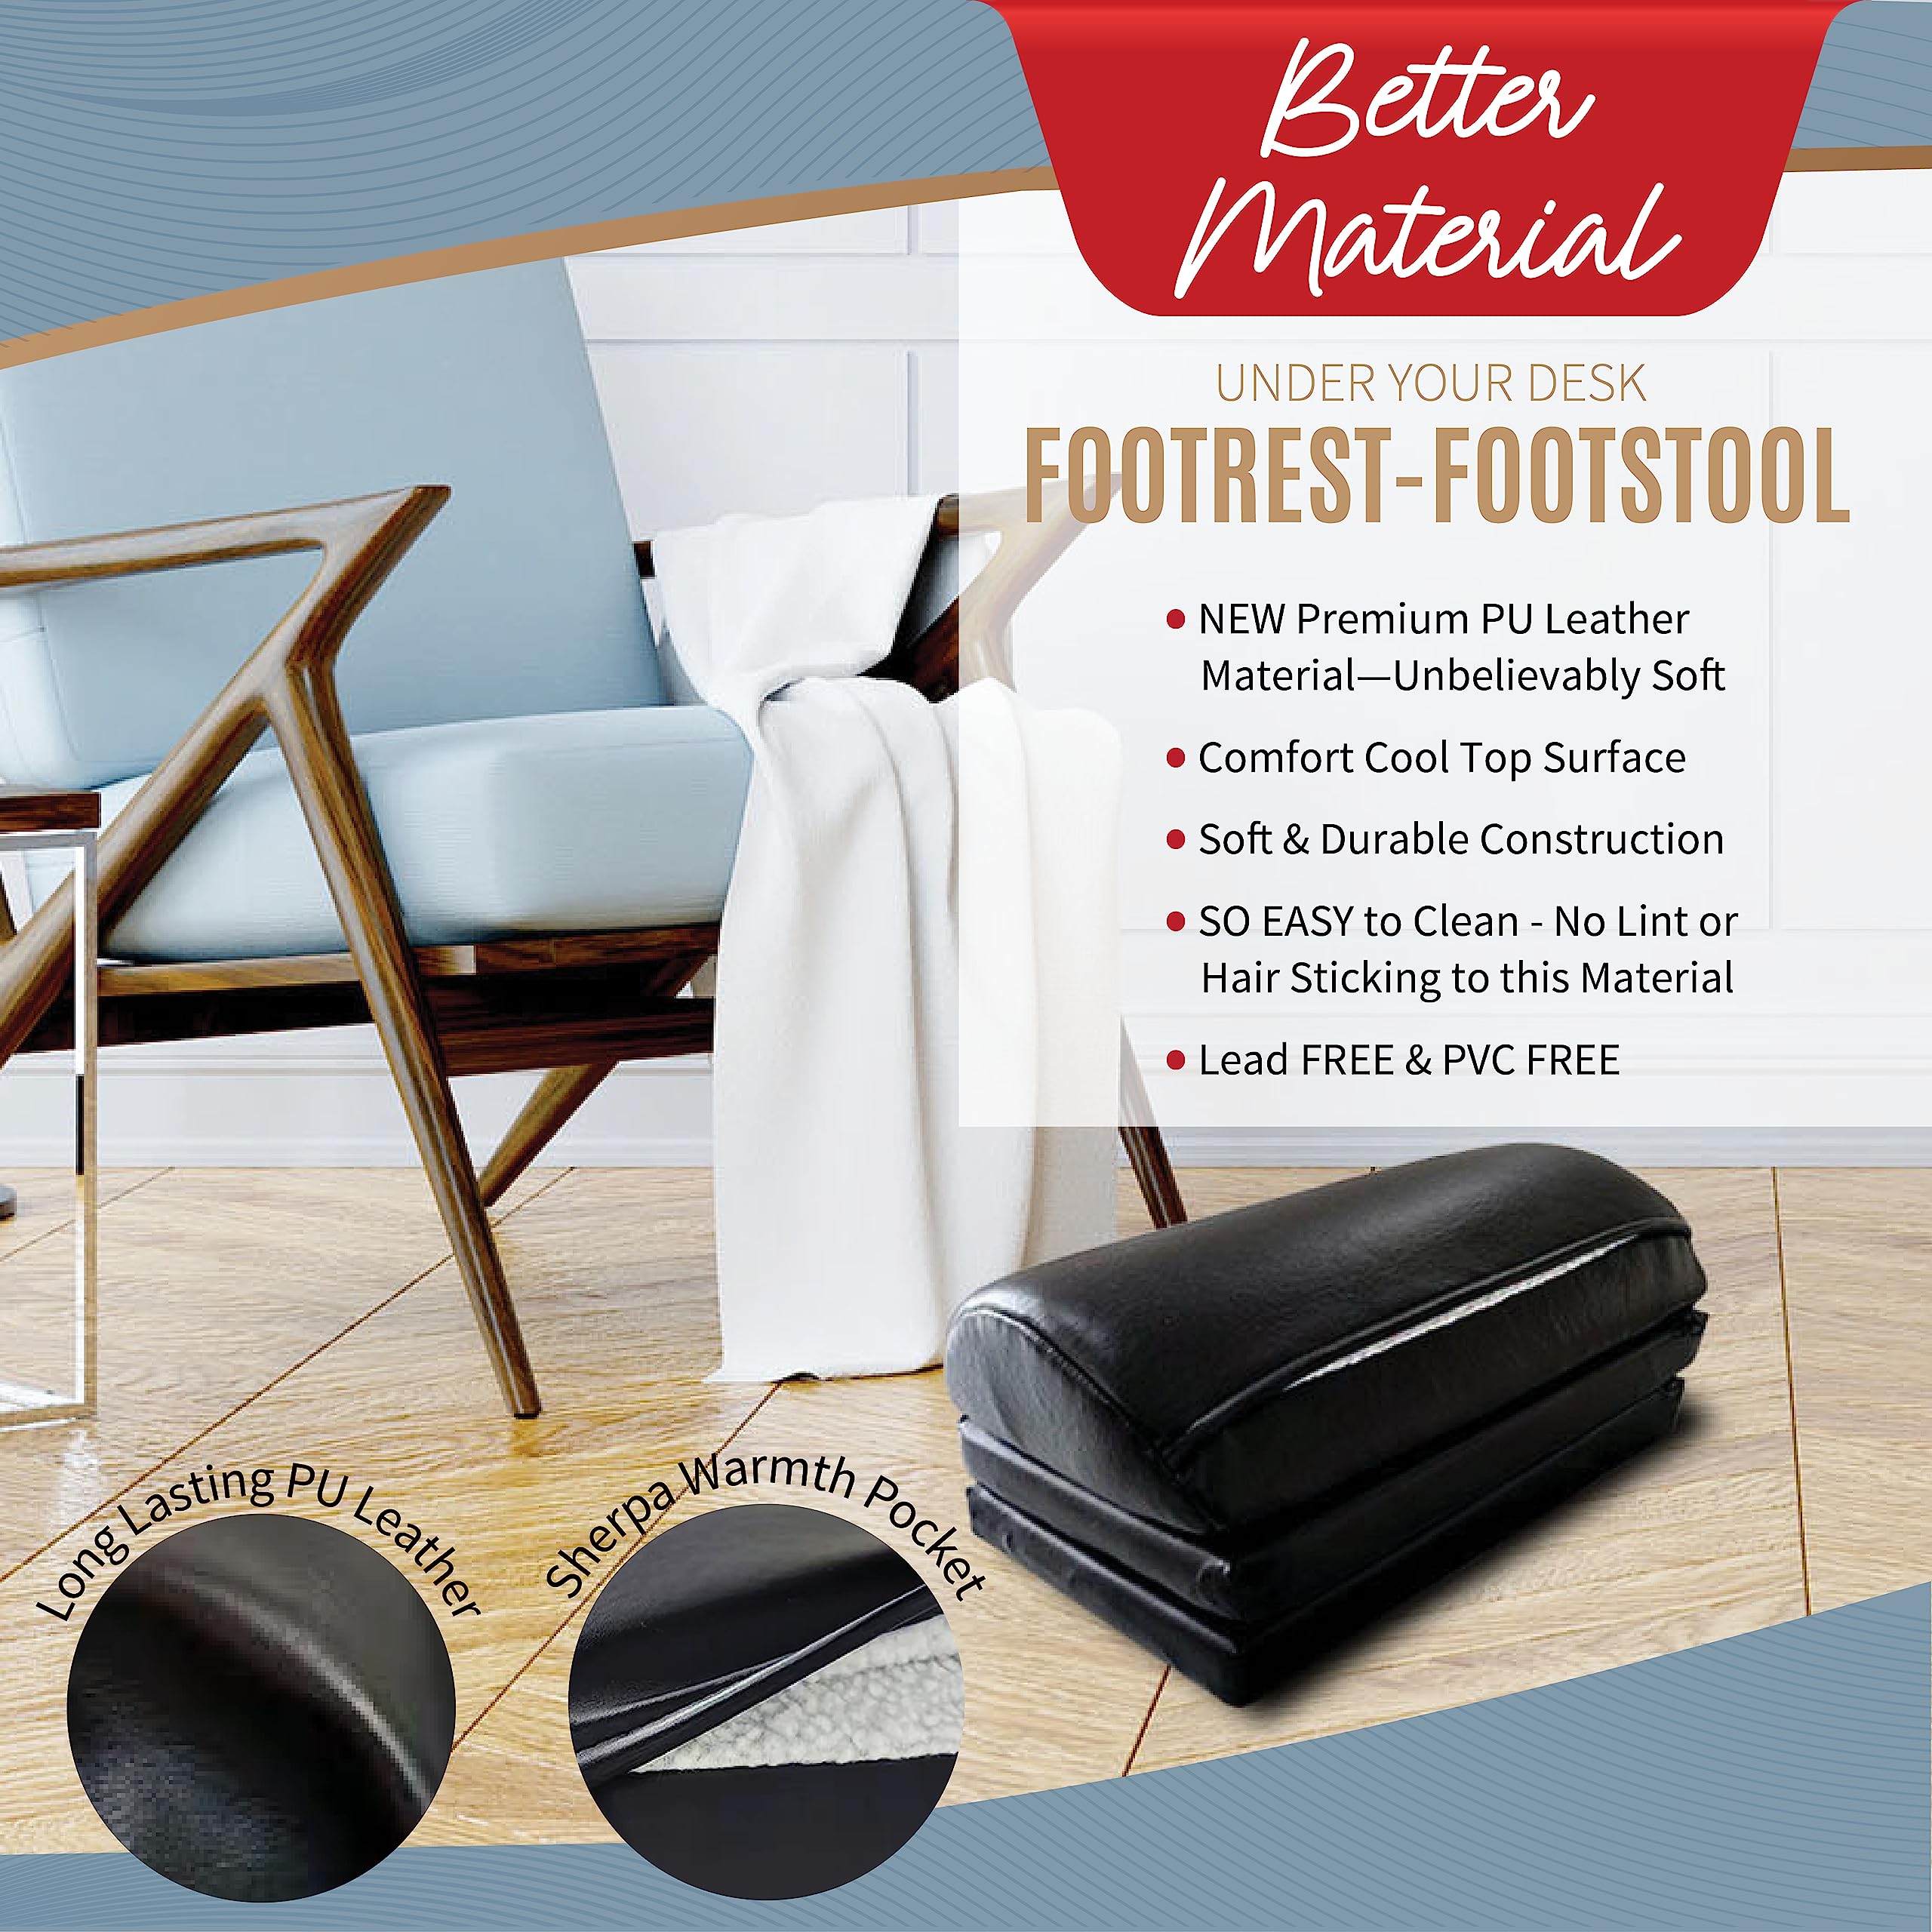 Under the Desk Foot Rest for Office, Work, Gaming, Car - Premium Memory Foam w PU Leather, Leg Pillow for Hip-Back Pain Relief - Adjustable Footrest, Ottoman Foot Stool w Cozy Foot Pocket. Easy CLEAN!